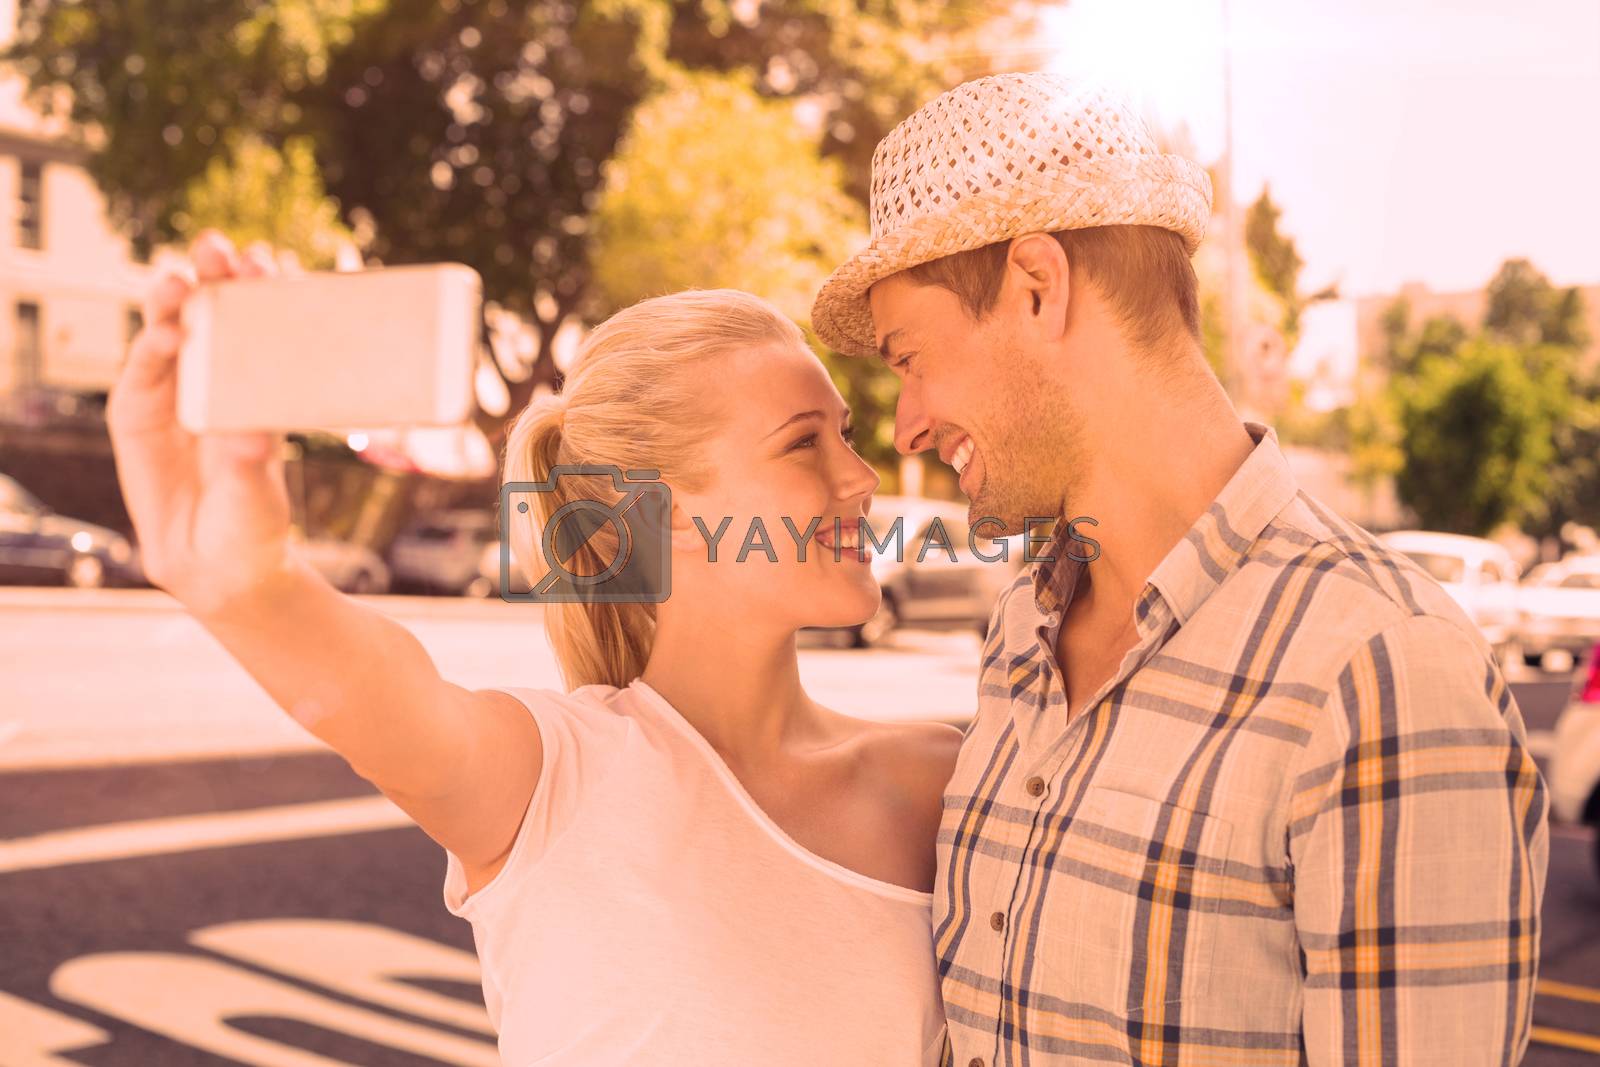 Royalty free image of Young hip couple taking a selfie by Wavebreakmedia